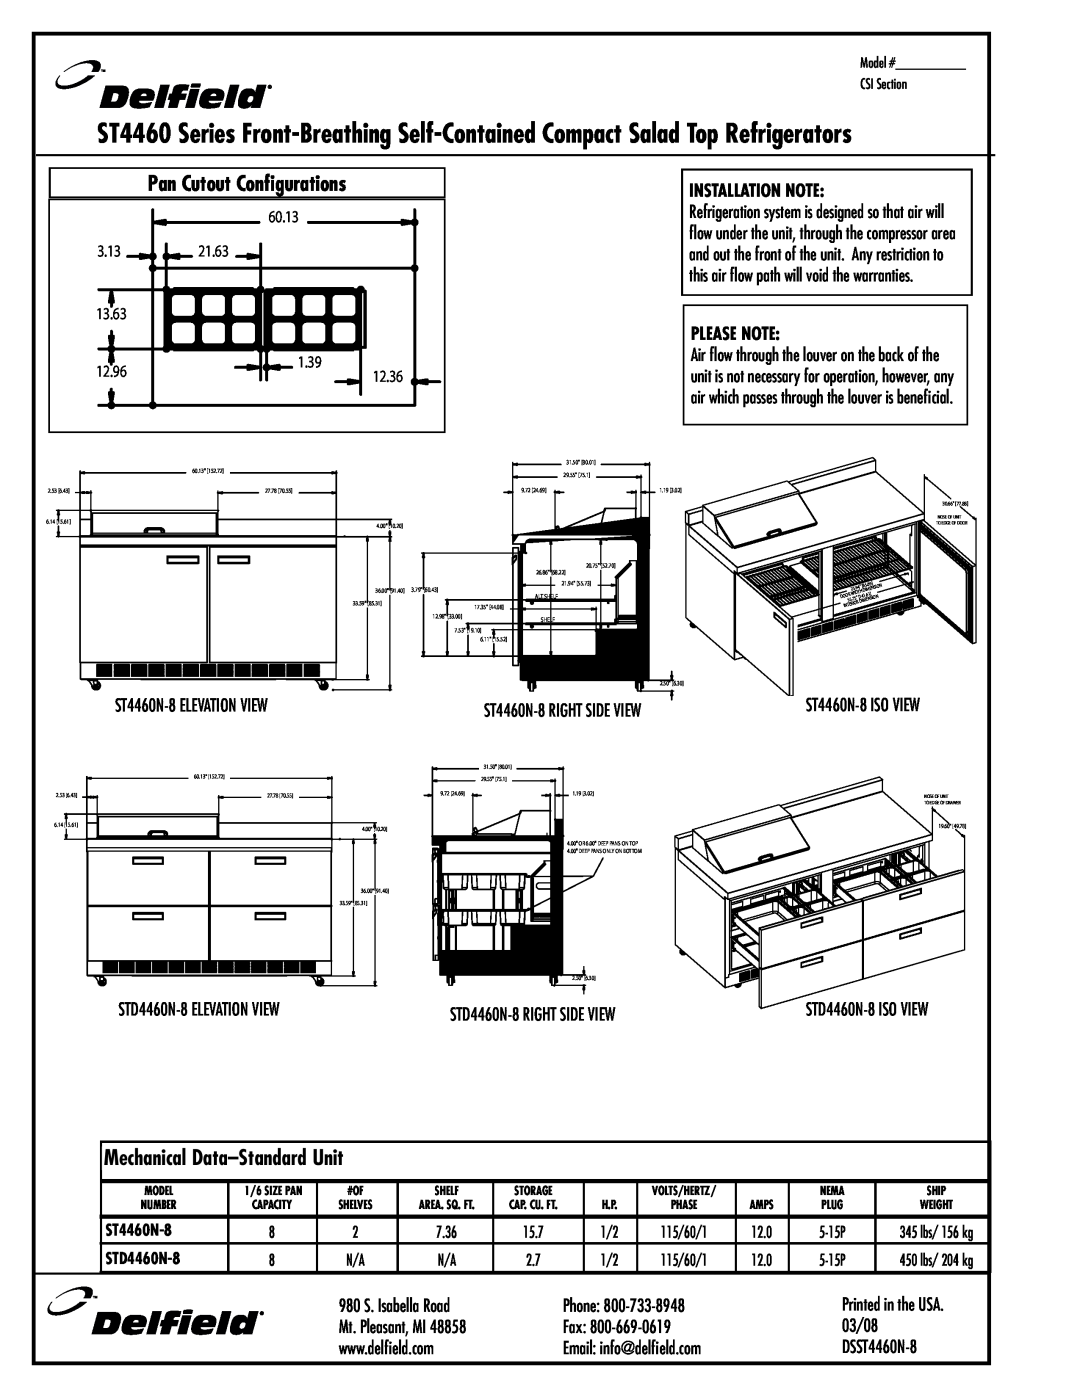 Delfield STD446-ON-8 manual Pan Cutout Configurations, Mechanical Data-Standard Unit, Installation Note, Please Note 